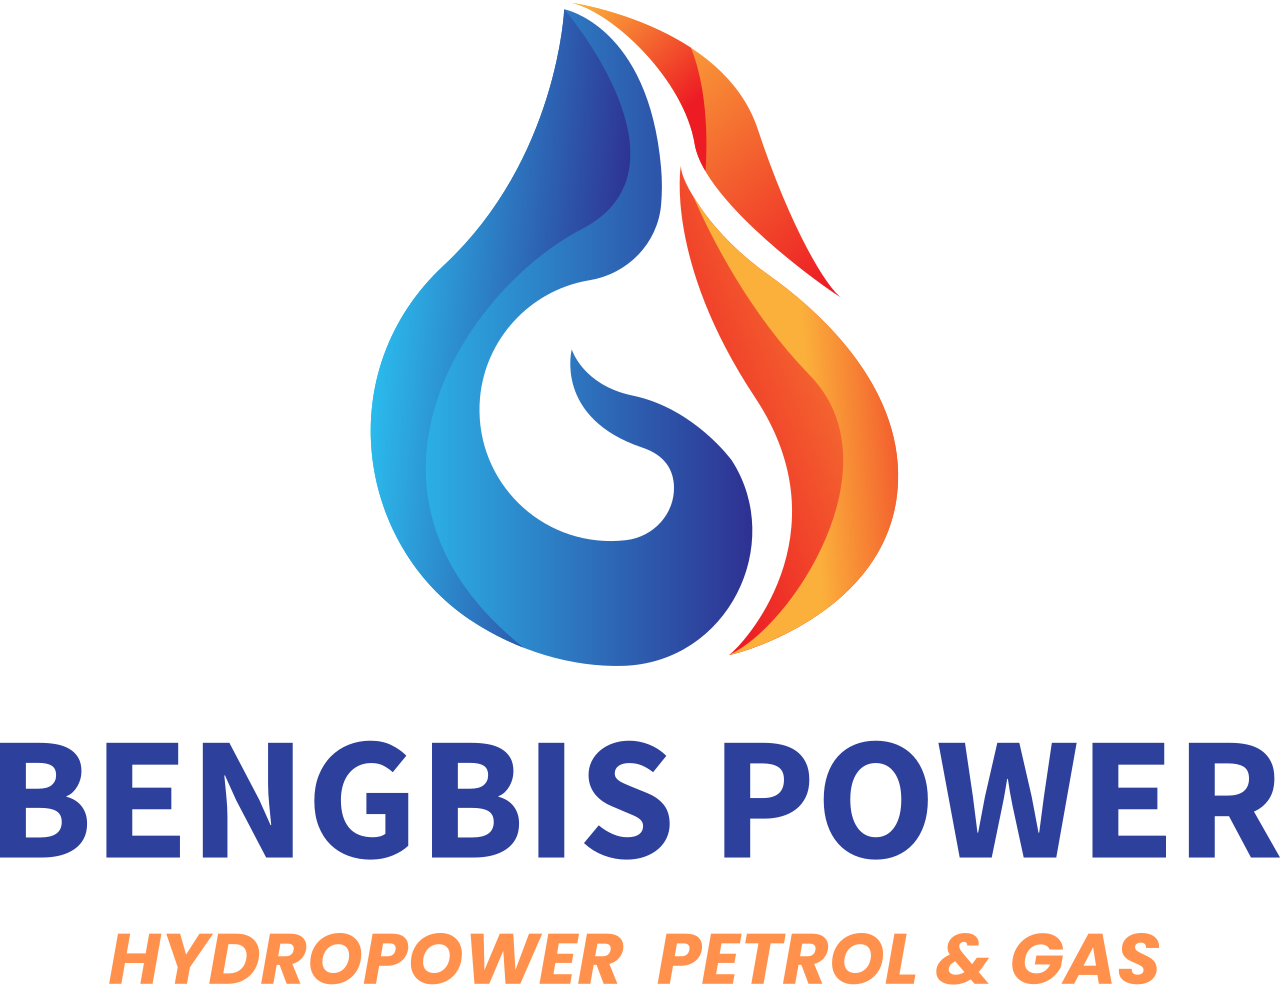 BENGBIS POWER's web page